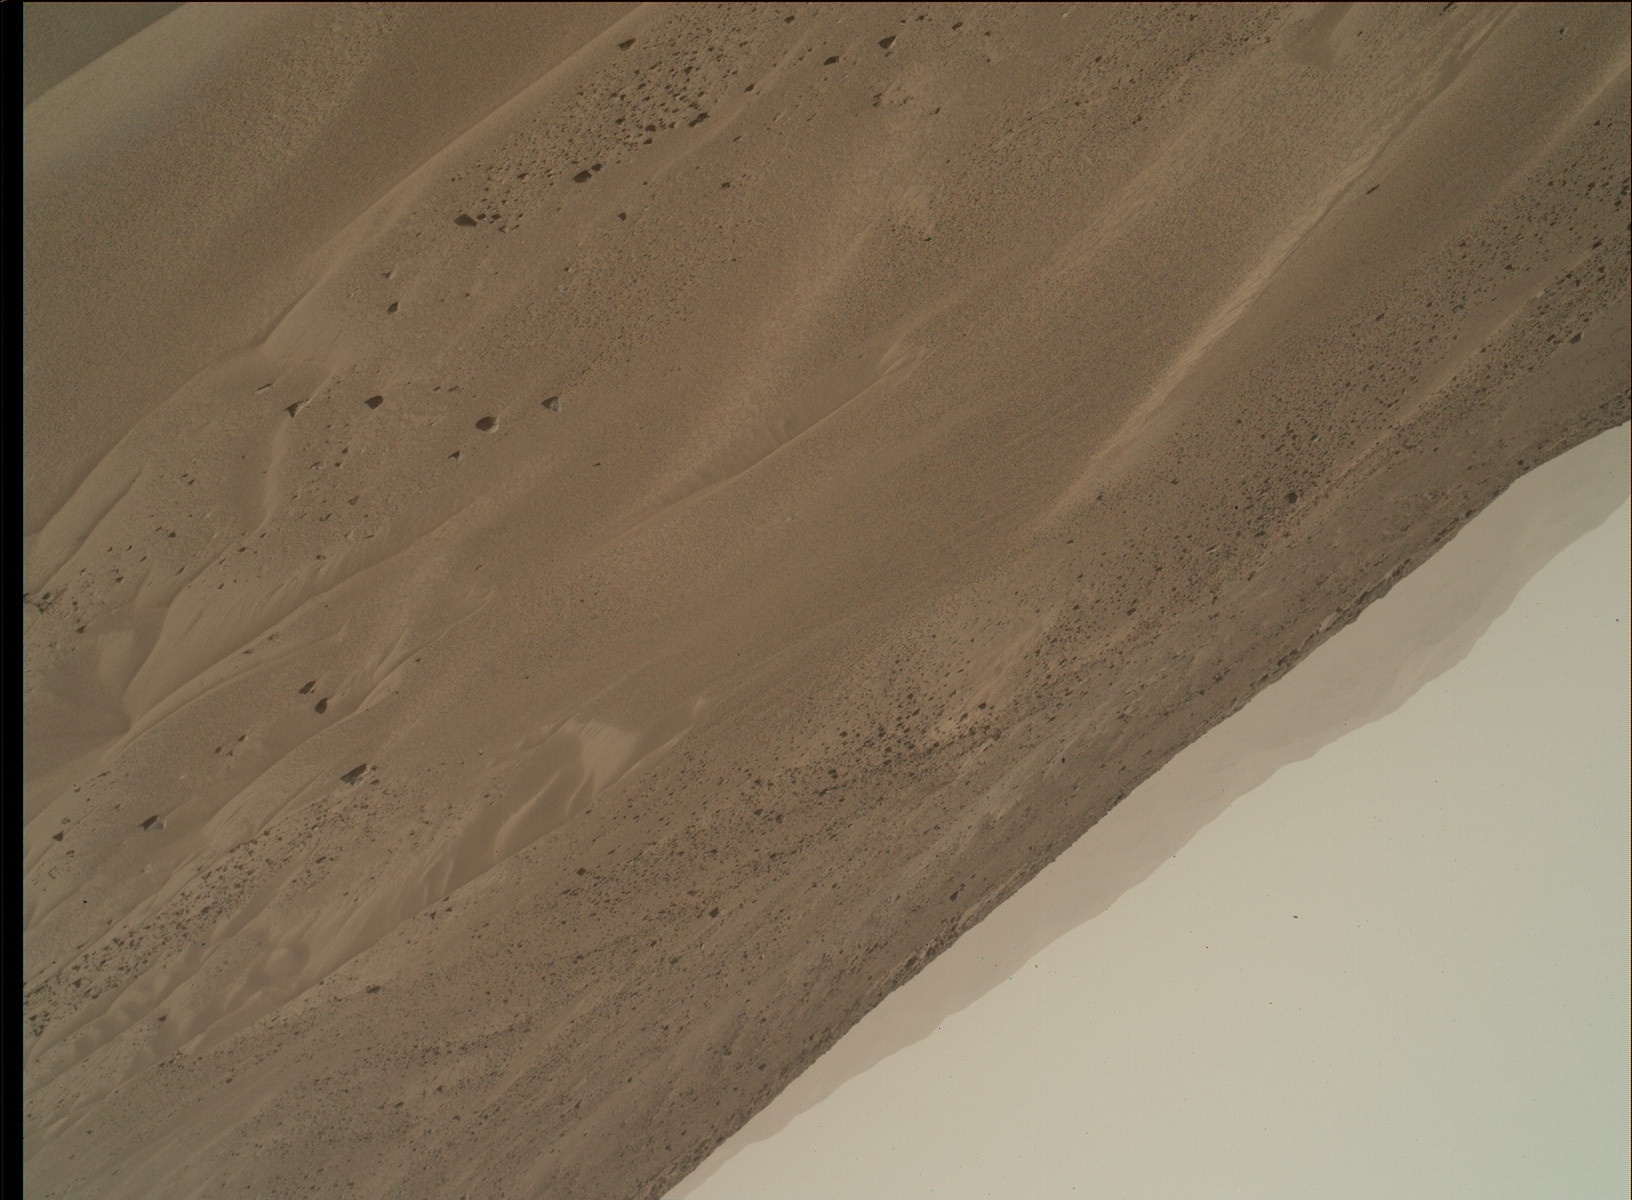 Nasa's Mars rover Curiosity acquired this image using its Mars Hand Lens Imager (MAHLI) on Sol 676